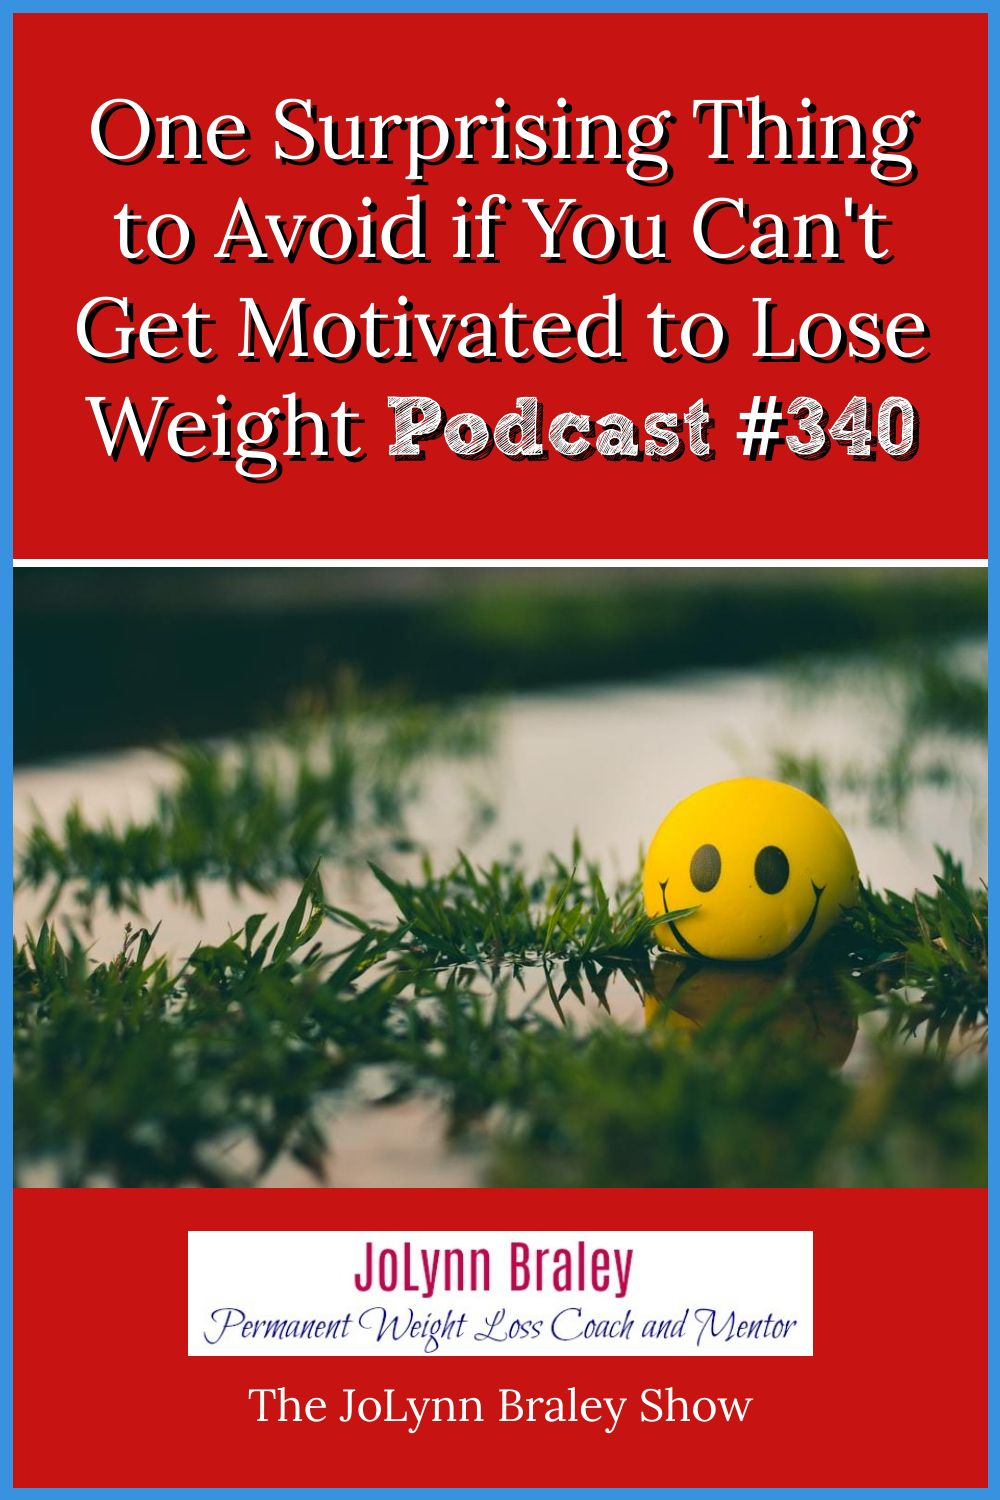 One Surprising Thing to Avoid If You Can\'t Get Motivated to Lose Weight [Podcast #340]